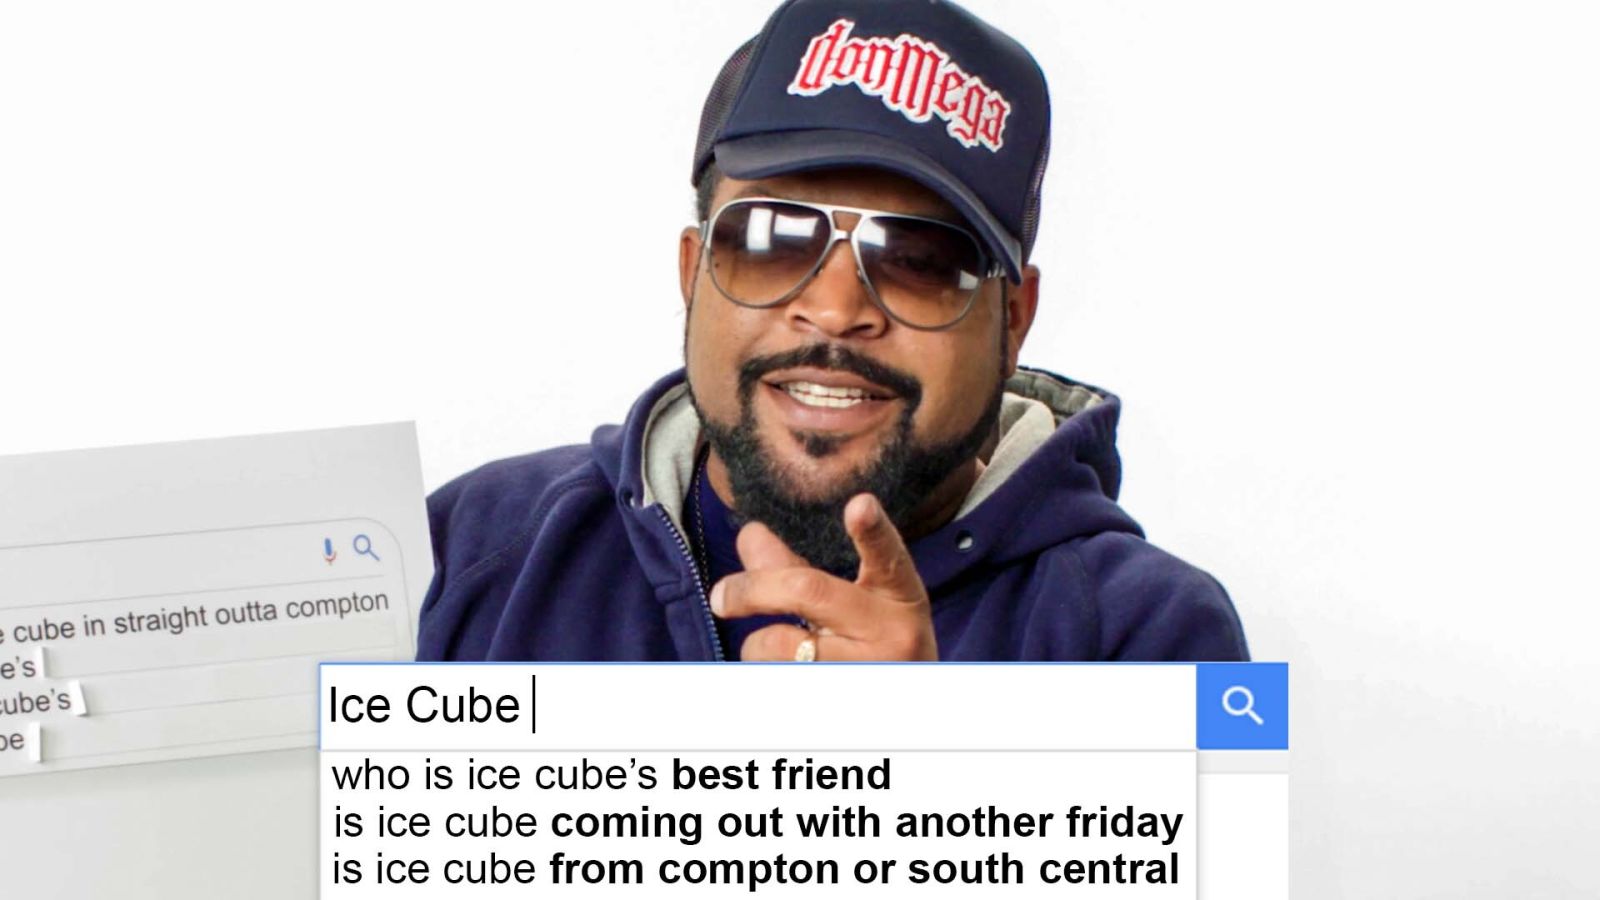 Ice Cube Answers The Web's Most Searched Questions